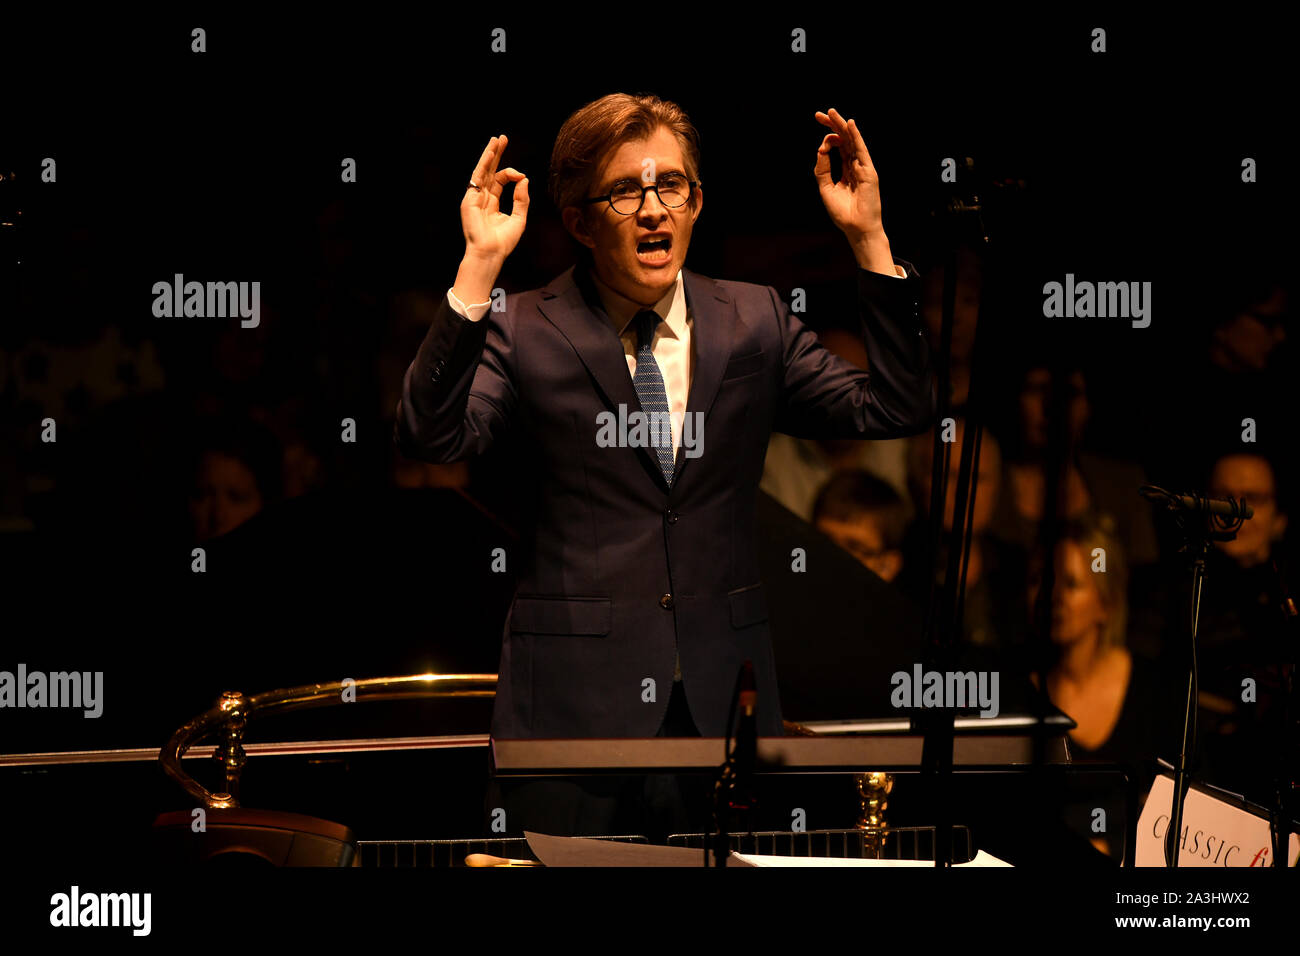 Gareth Malone conducts the Bournemouth Symphony Orchestra and Chorus at Classic FM Live at London's Royal Albert Hall. Stock Photo